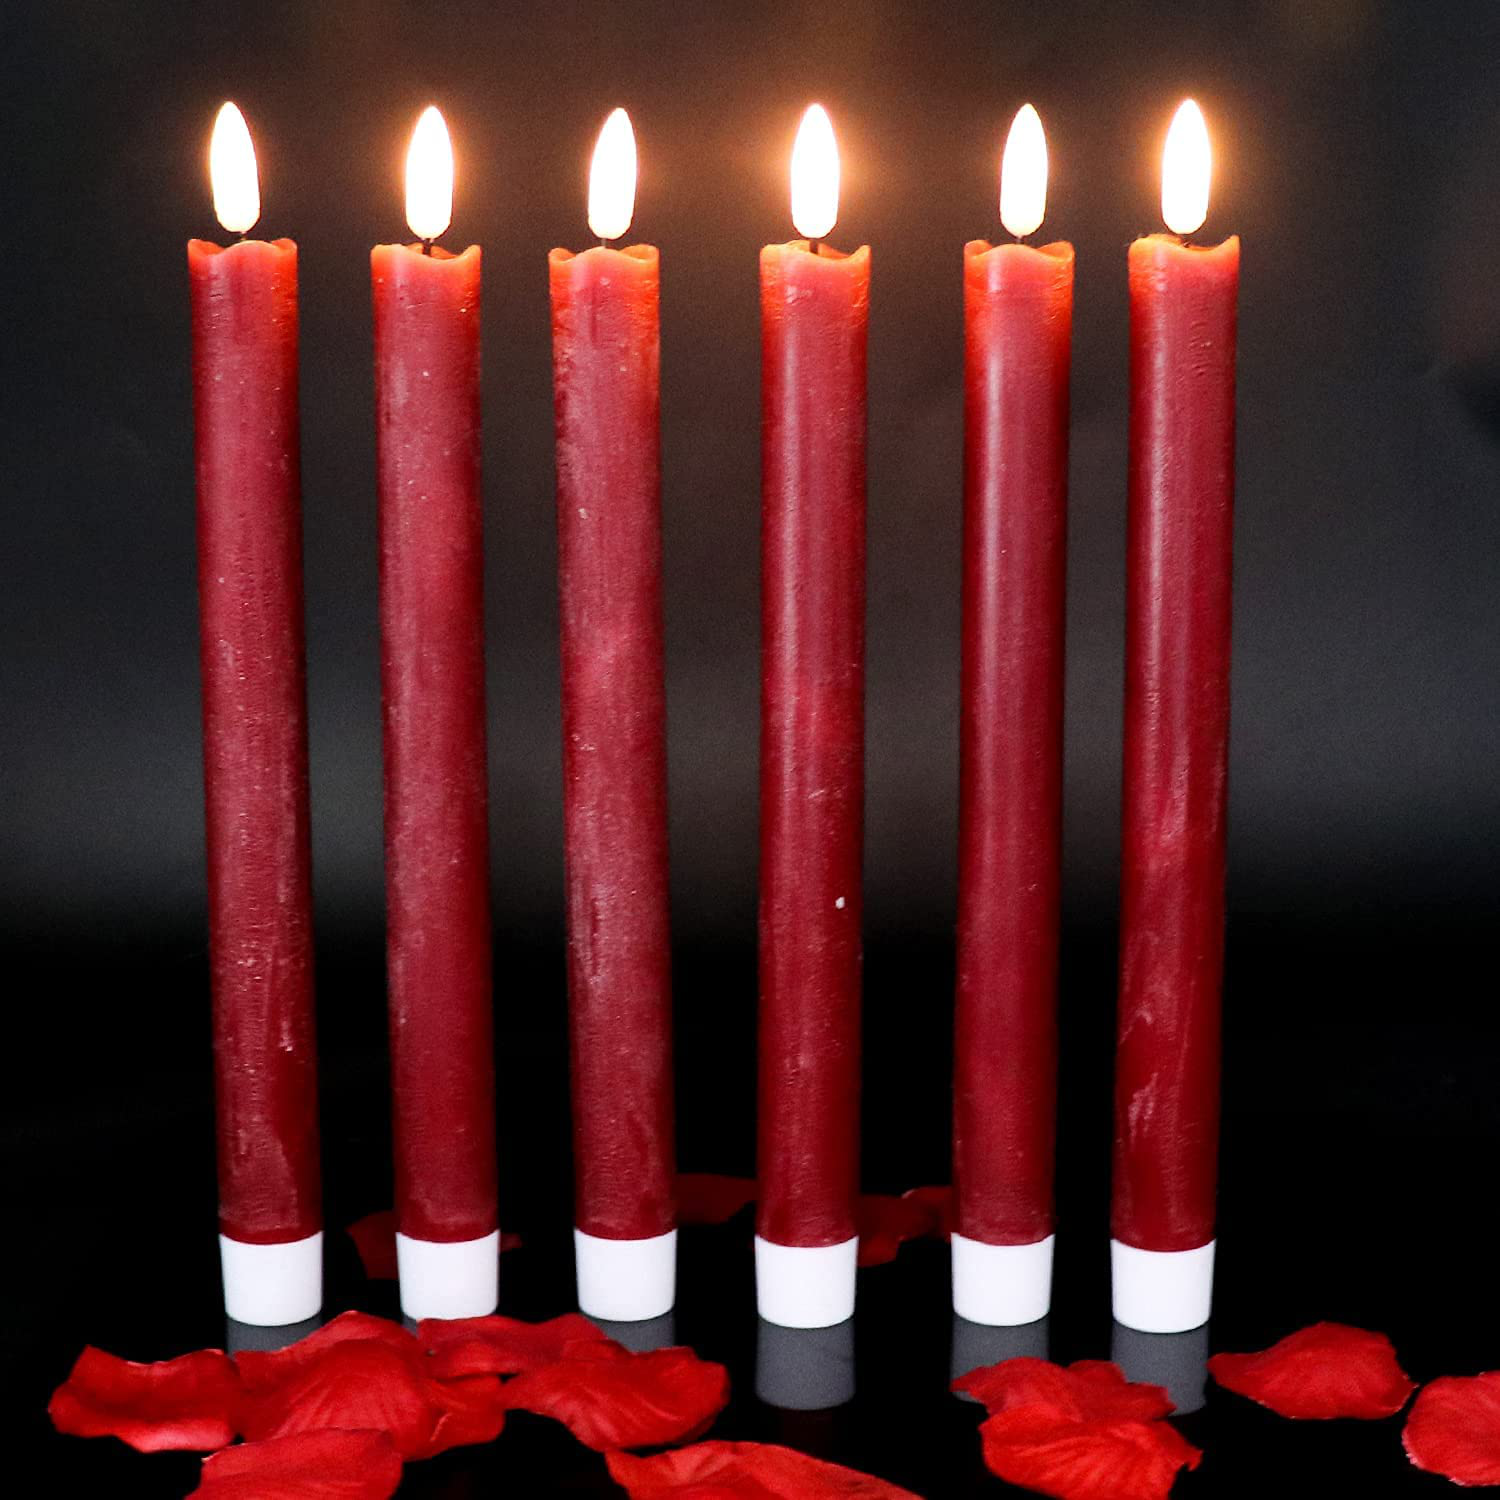 Wondise Flameless Flickering Taper Candles with Timer, 9 Inch Burgundy ...